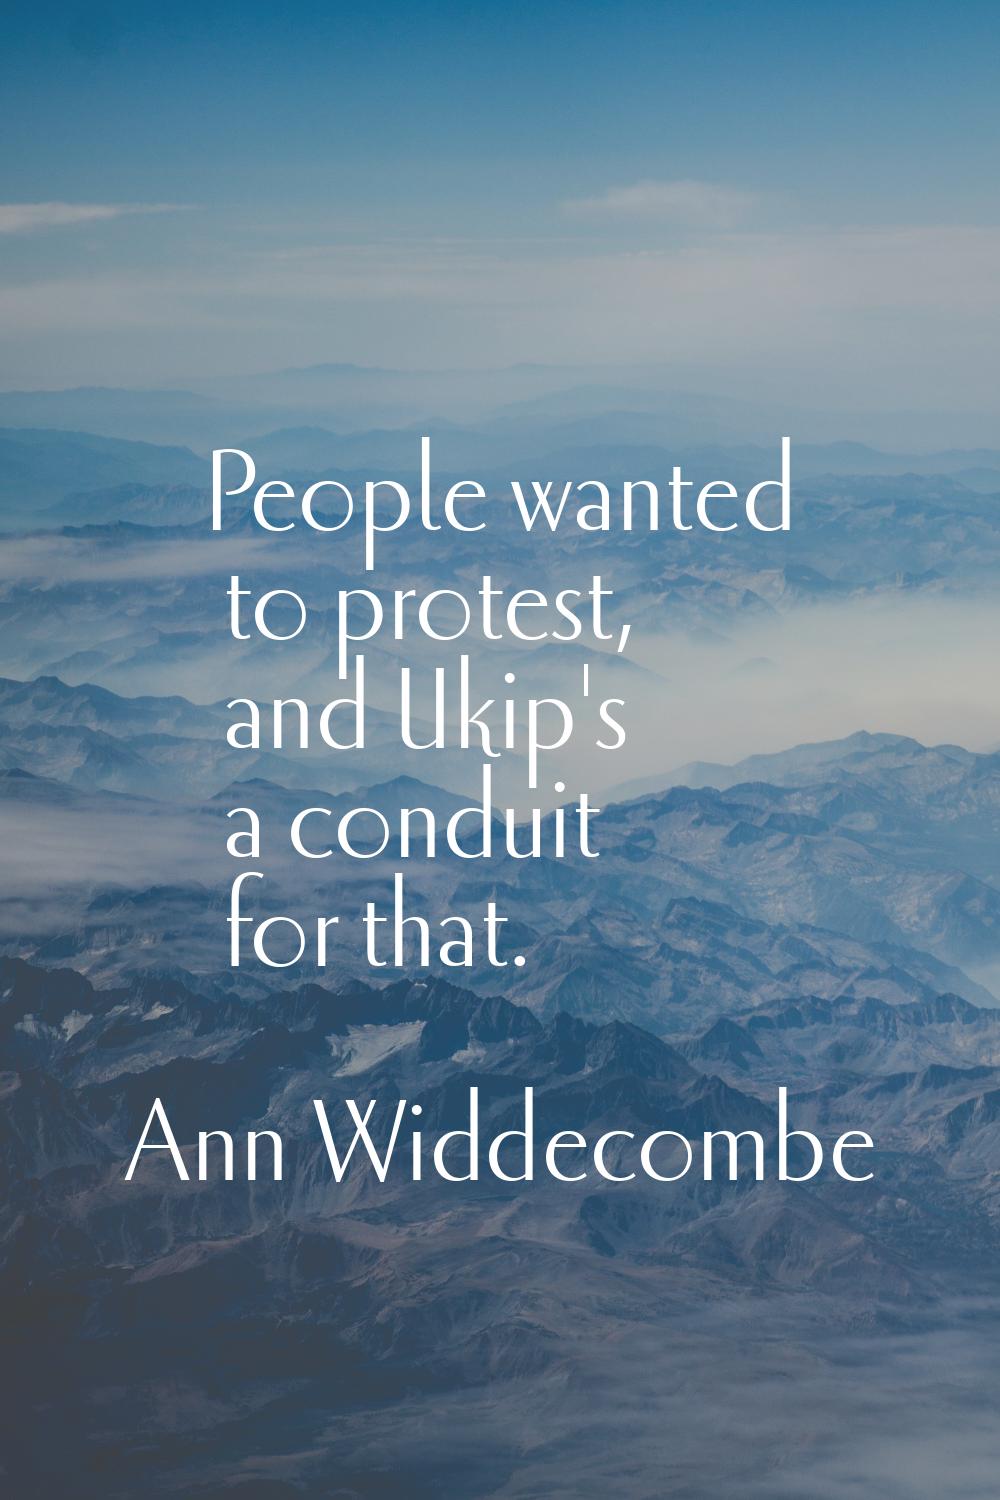 People wanted to protest, and Ukip's a conduit for that.